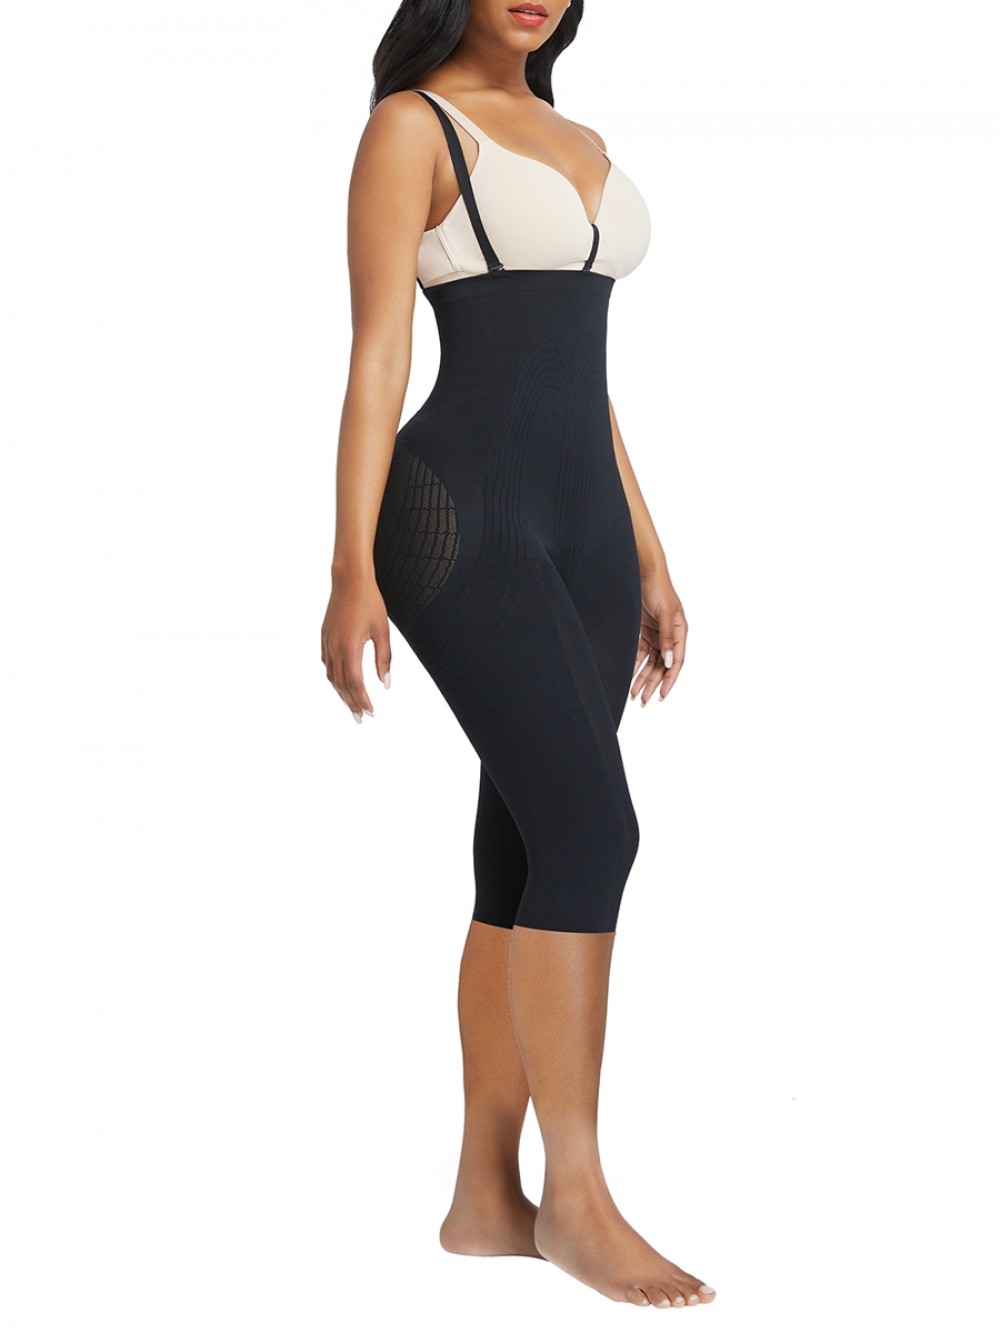 Black Plus Size Full Body Shaper With Open Crotch Smooth Silhouette